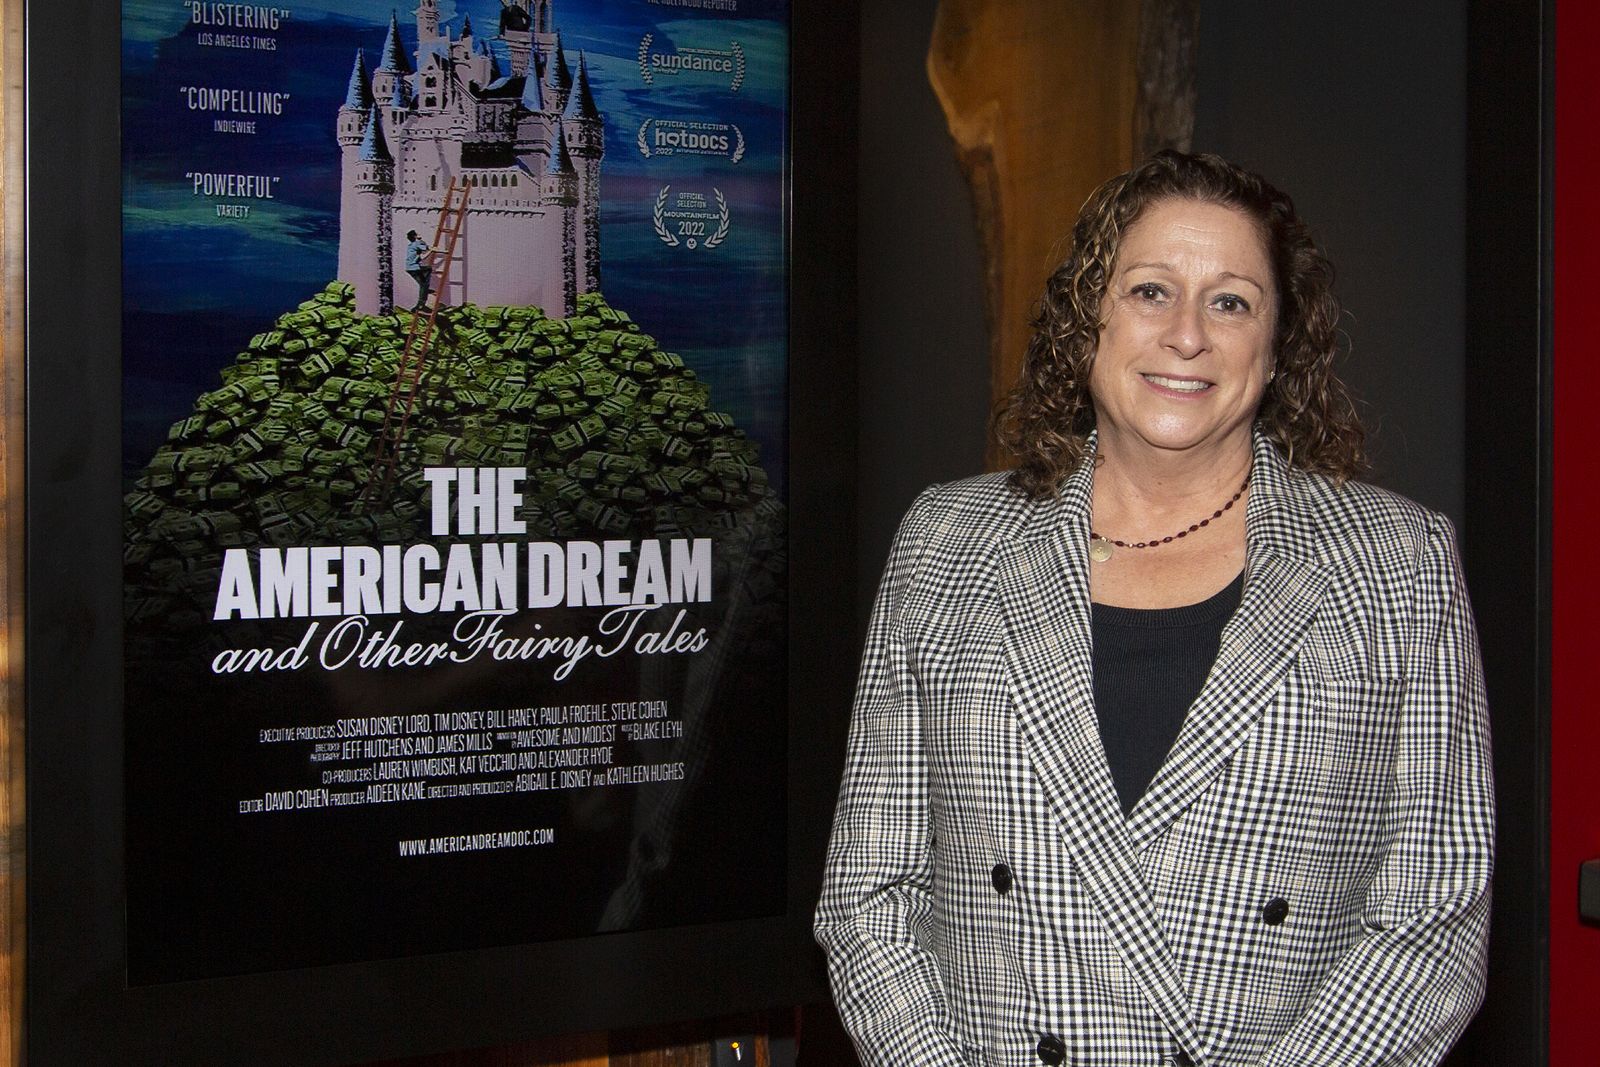 Kanin lokal Wreck Abigail Disney Criticizes Labor Practices at the Company Her Family Founded  | Smart News| Smithsonian Magazine